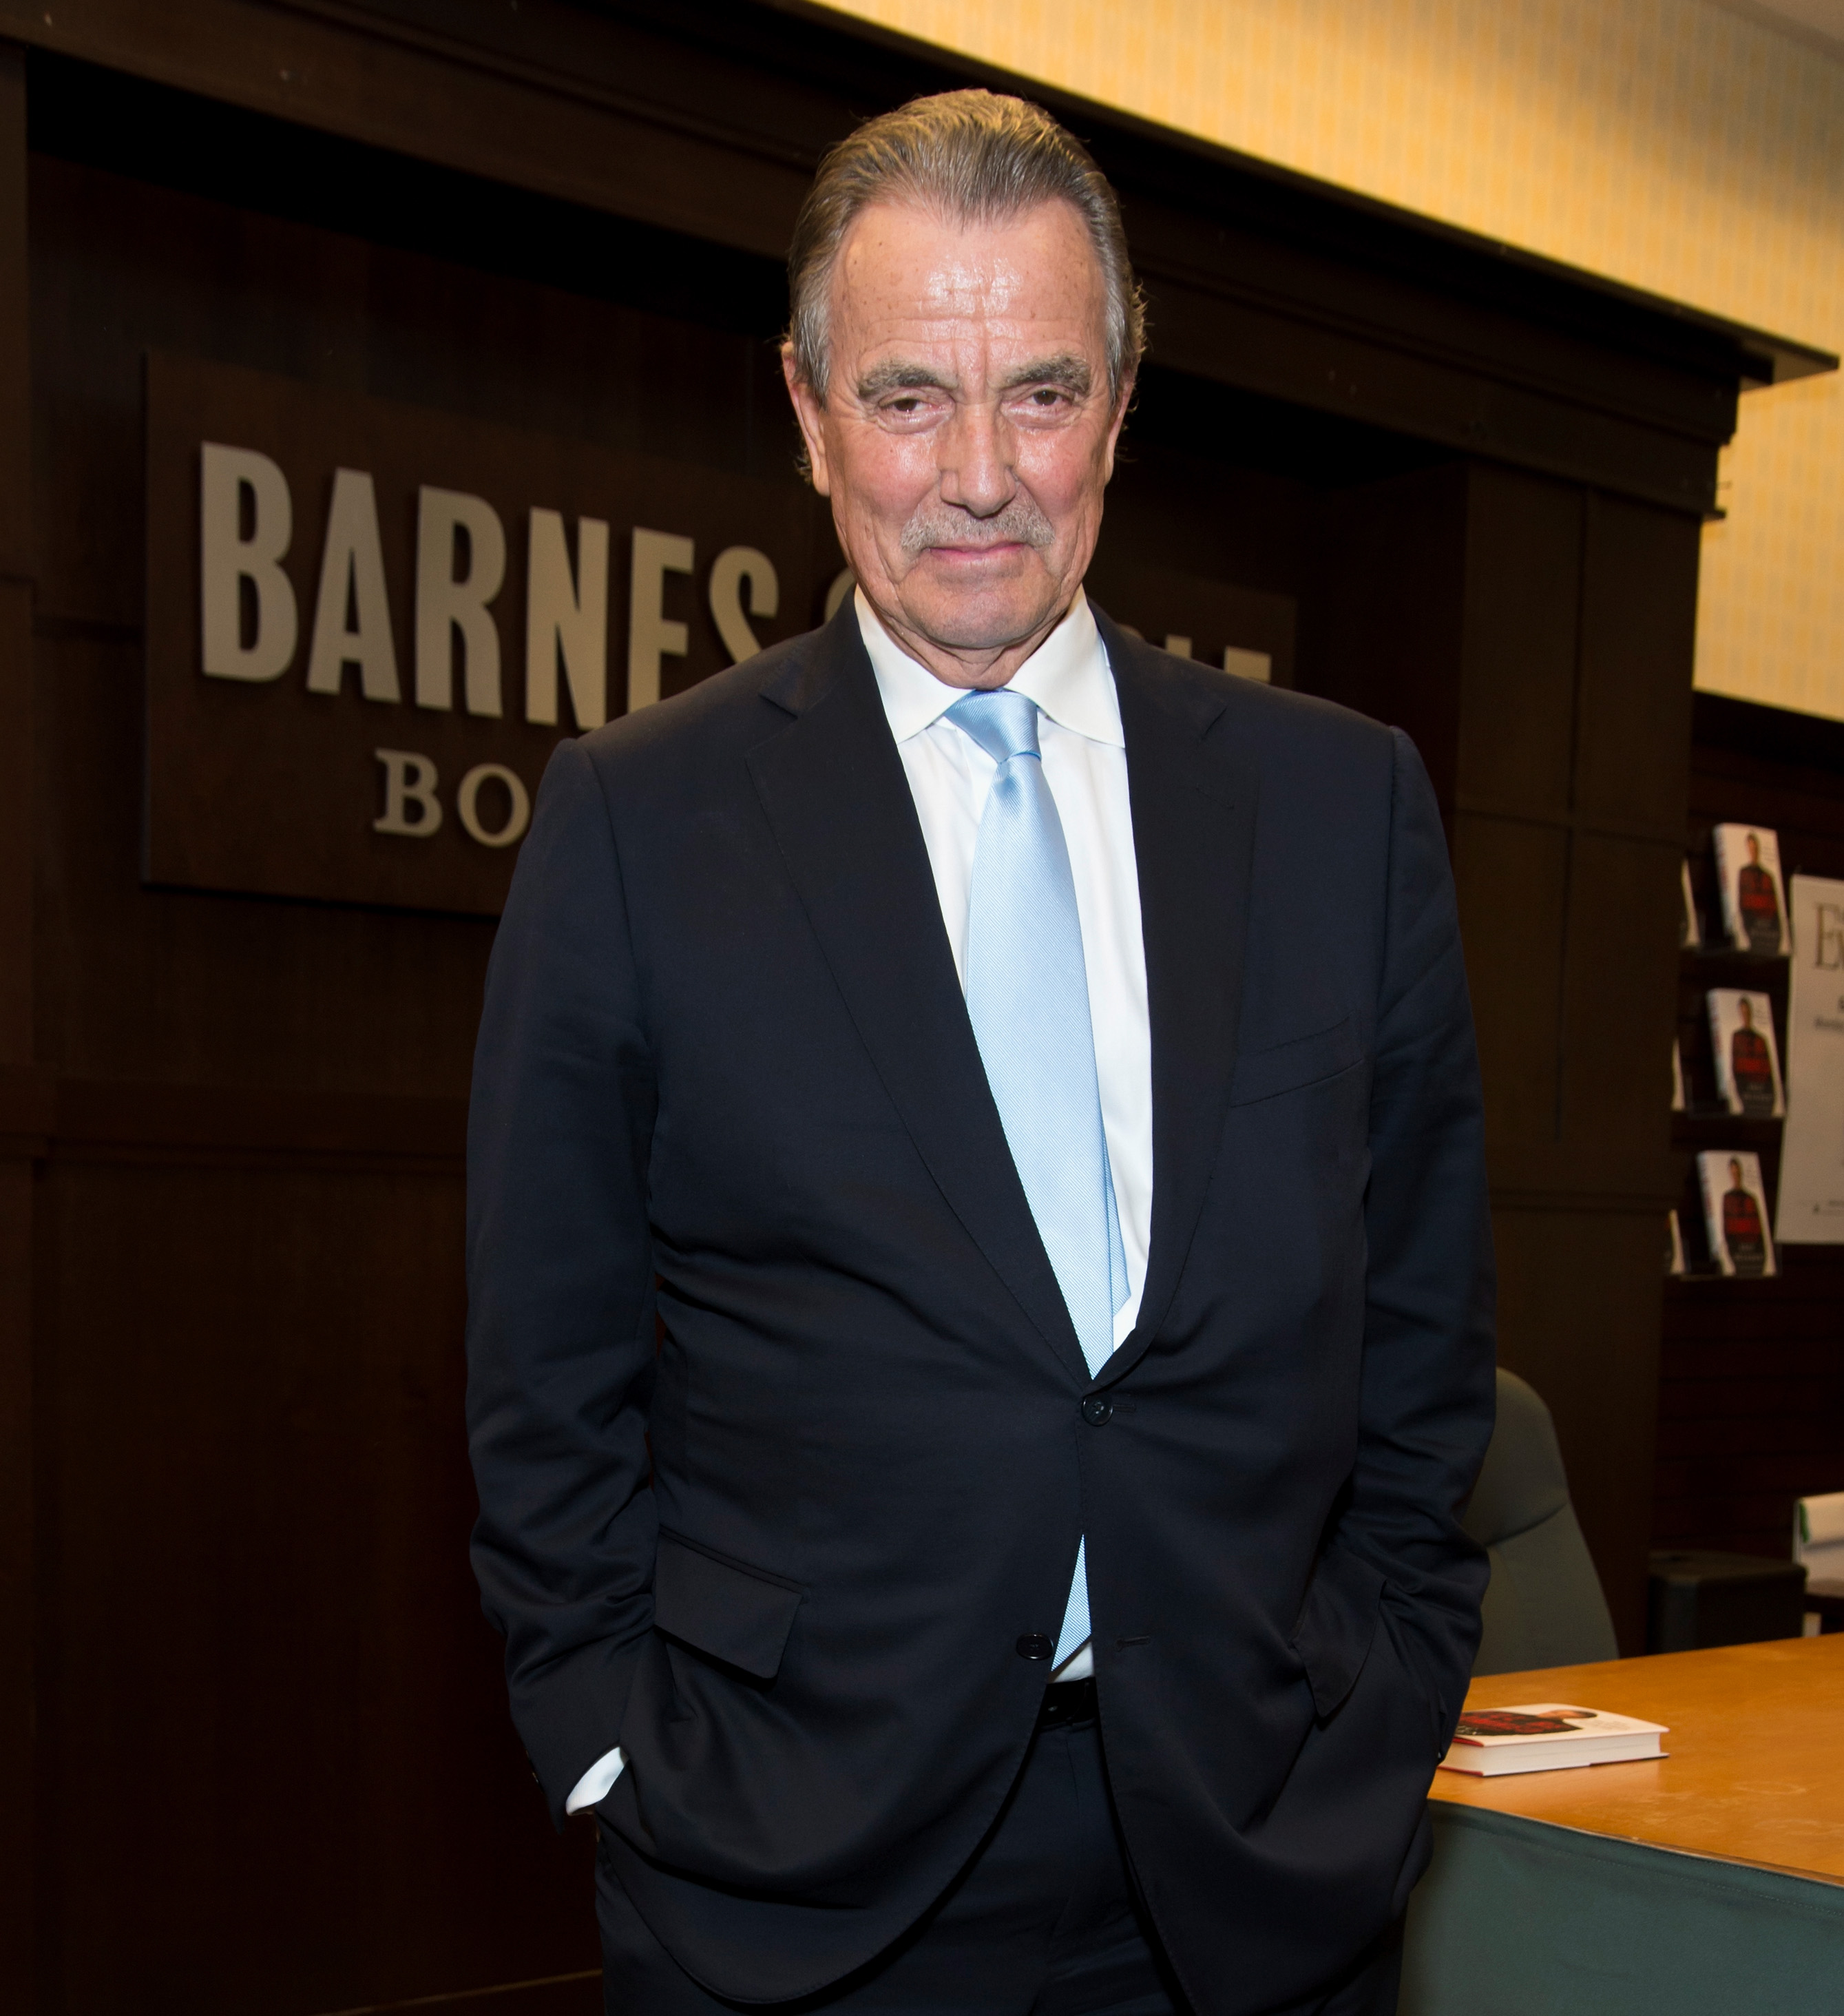 Eric Braeden arrives at his book signing for "I'll Be Damned: How My Young And Restless Life Led Me To America's #1 Daytime Drama" at Barnes & Noble at The Grove on February 13, 2017, in Los Angeles, California. | Source: Getty Image